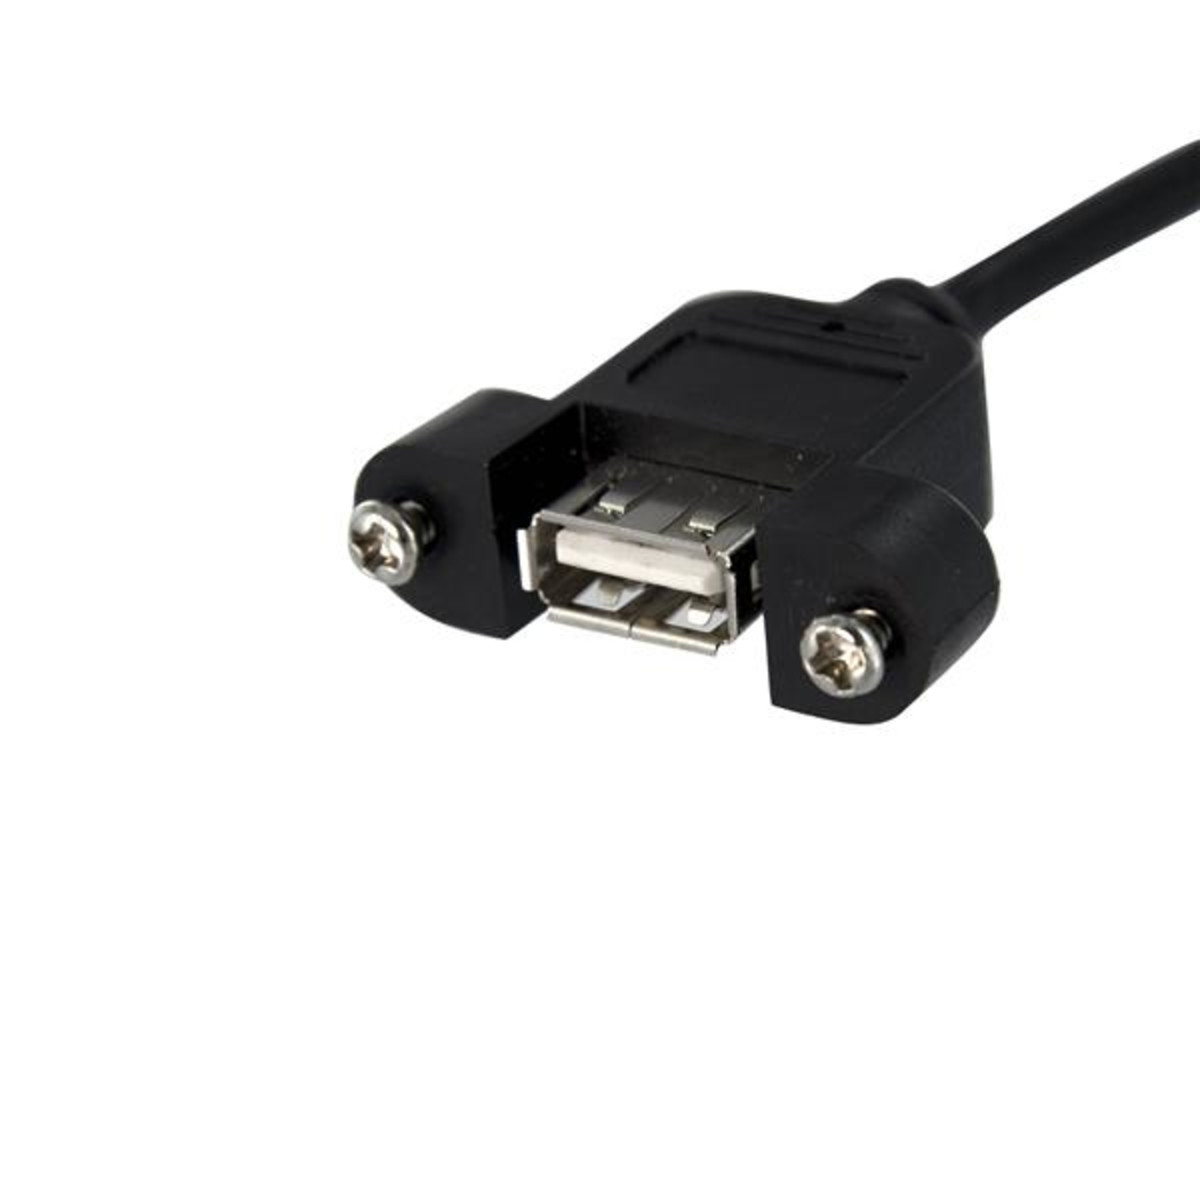 3 ft Panel Mount USB Cable